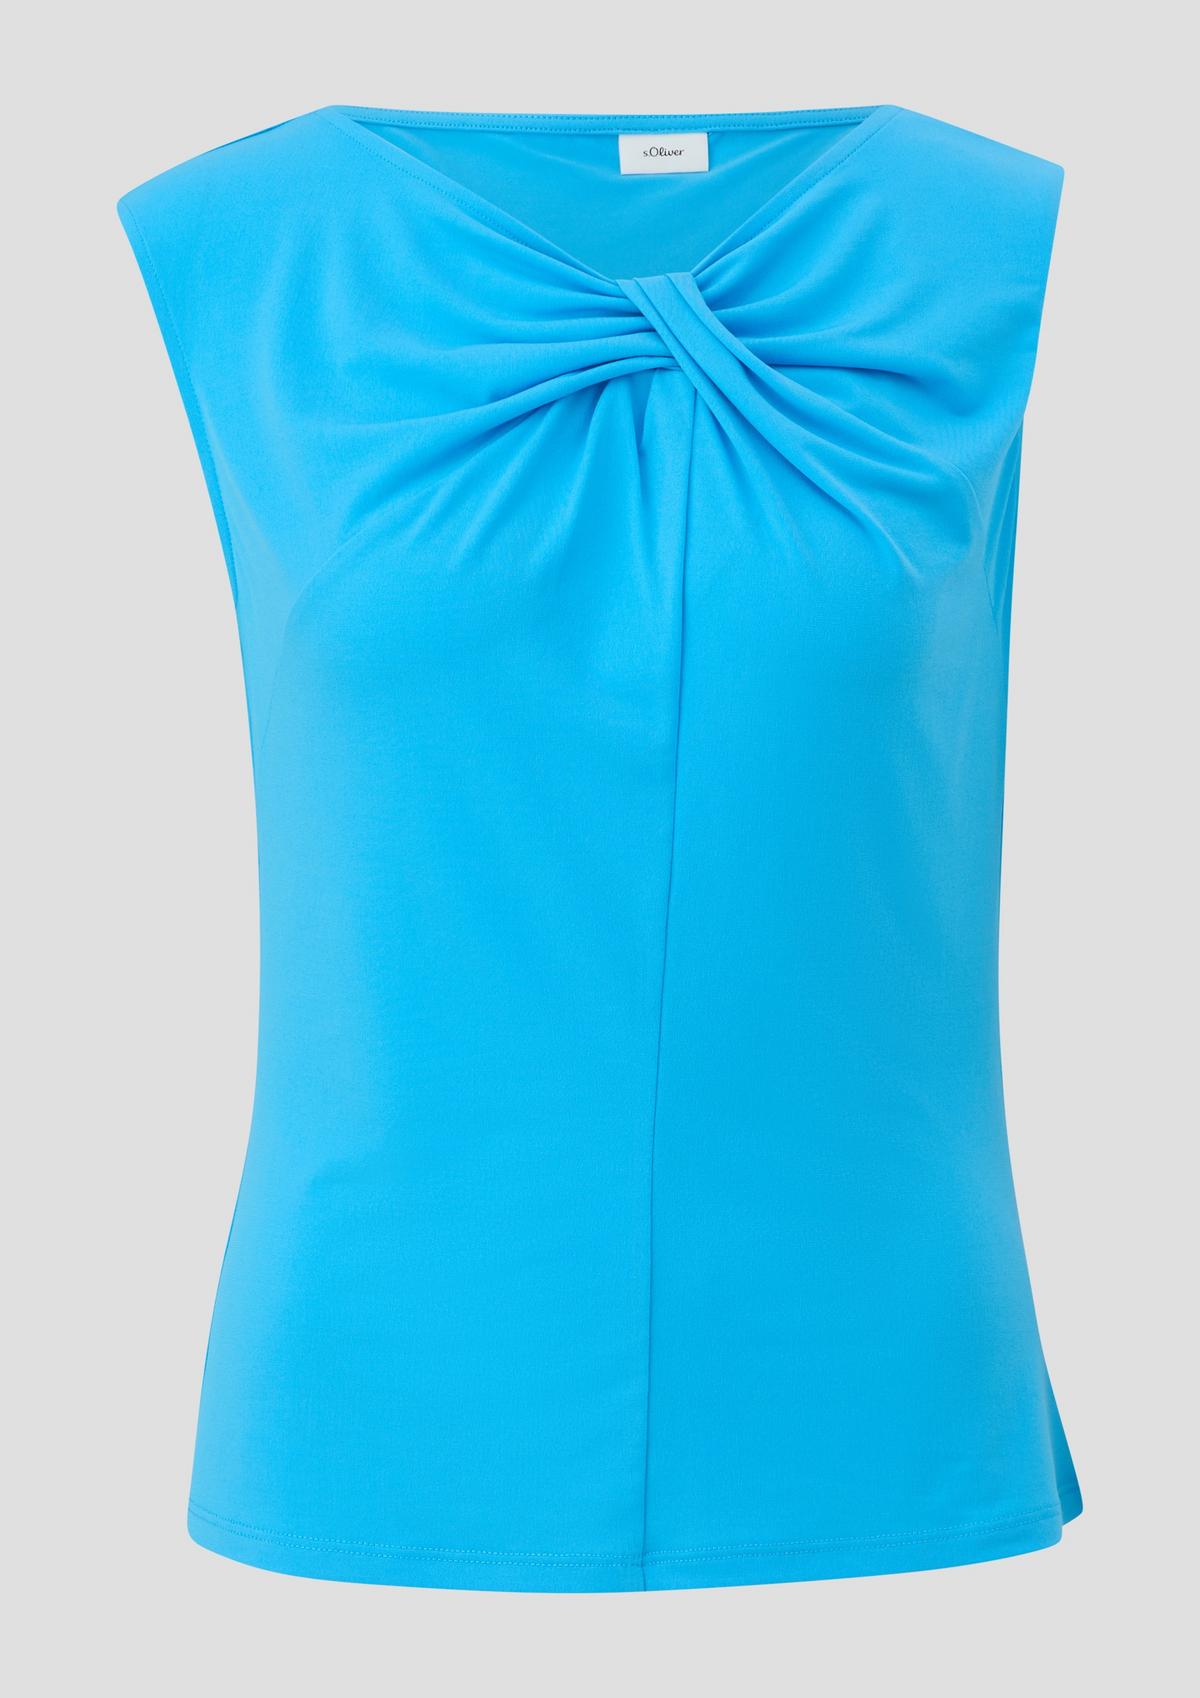 s.Oliver Sleeveless top with a knotted detail on the front